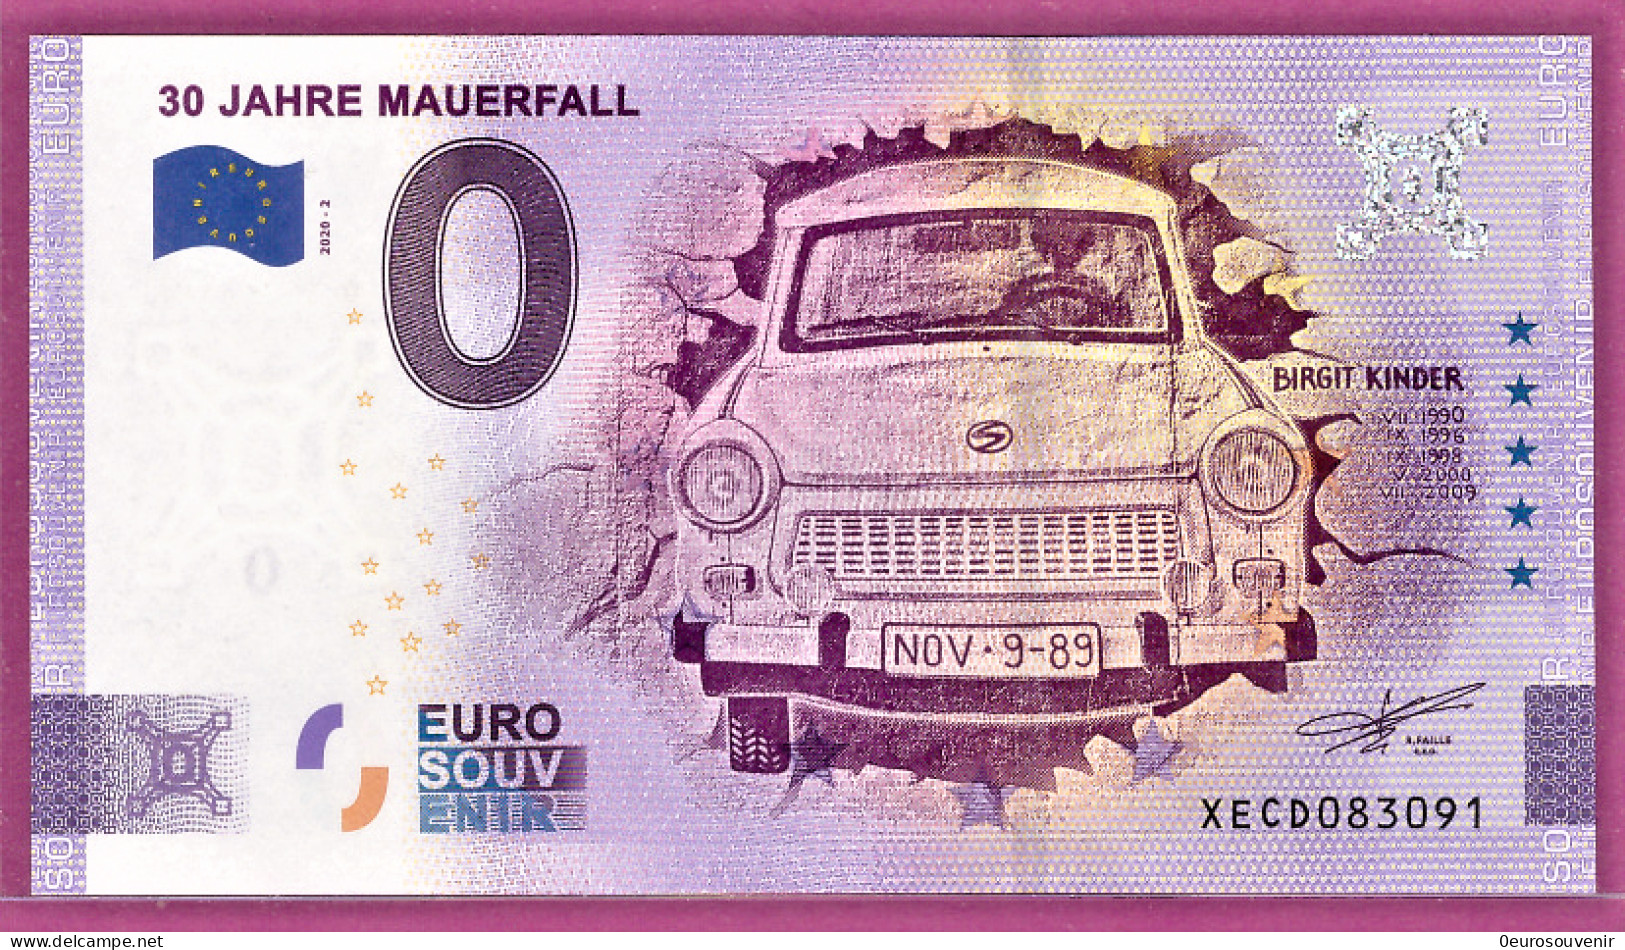 0-Euro XECD 2020-2 30 JAHRE MAUERFALL - Private Proofs / Unofficial